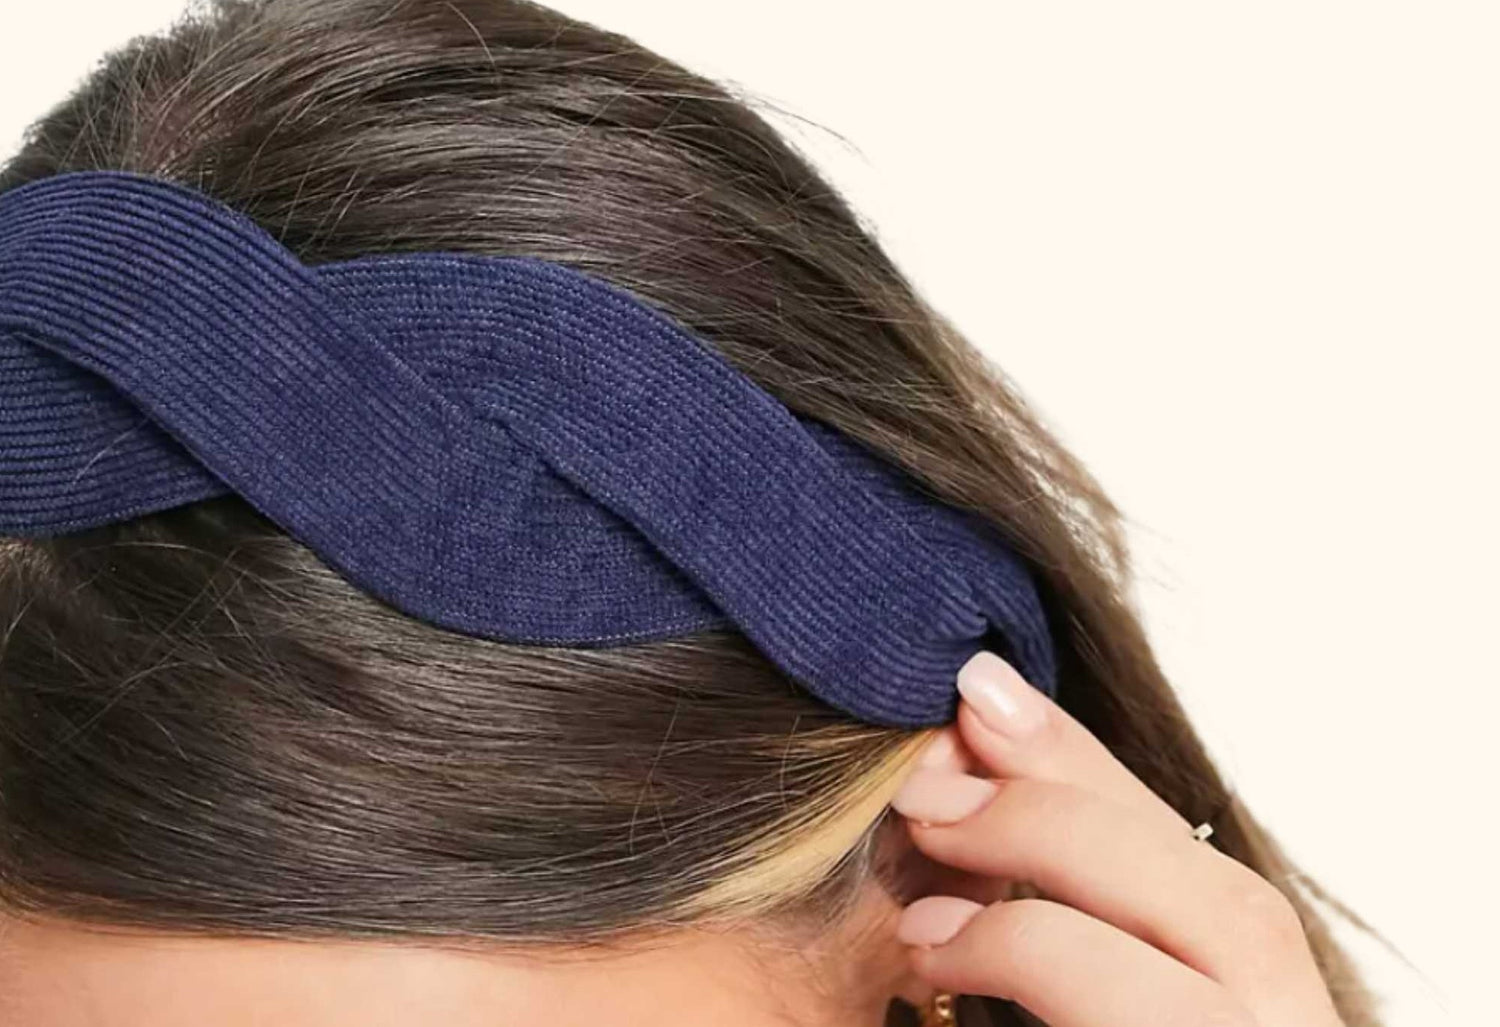 Hair Accessories and Headbands